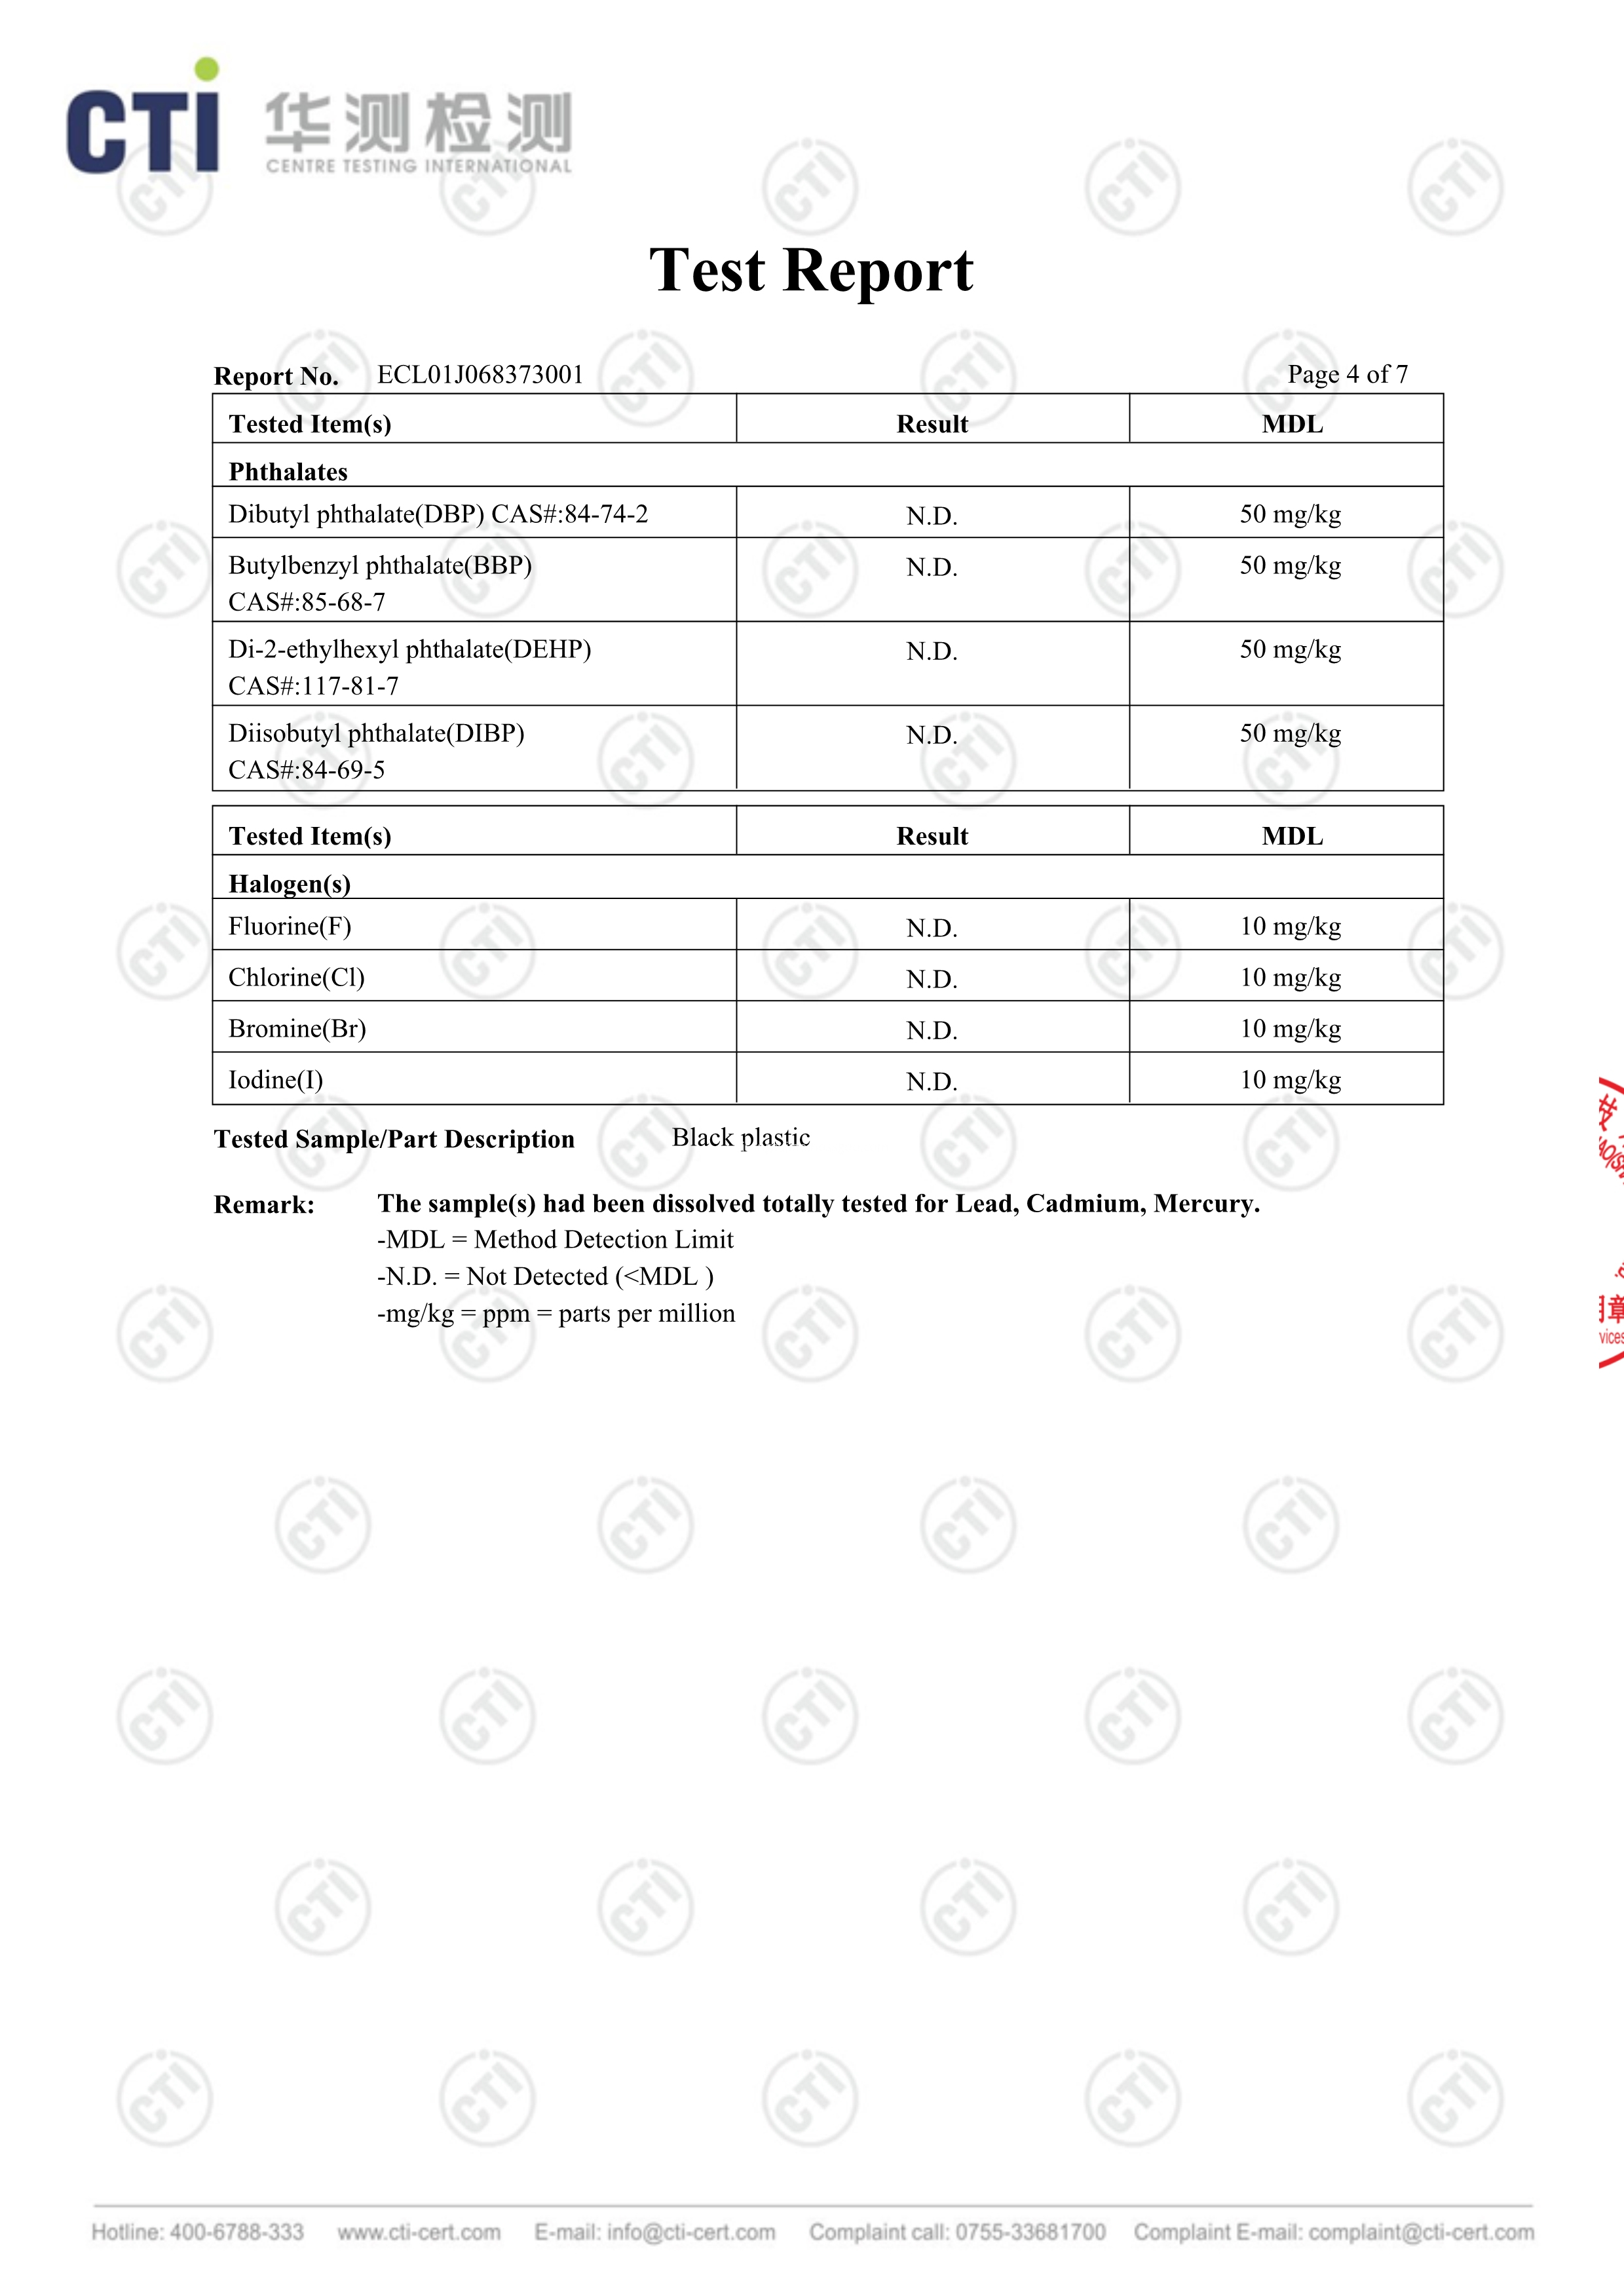 PS Conductive Shee ROHS & Halogen test report 4